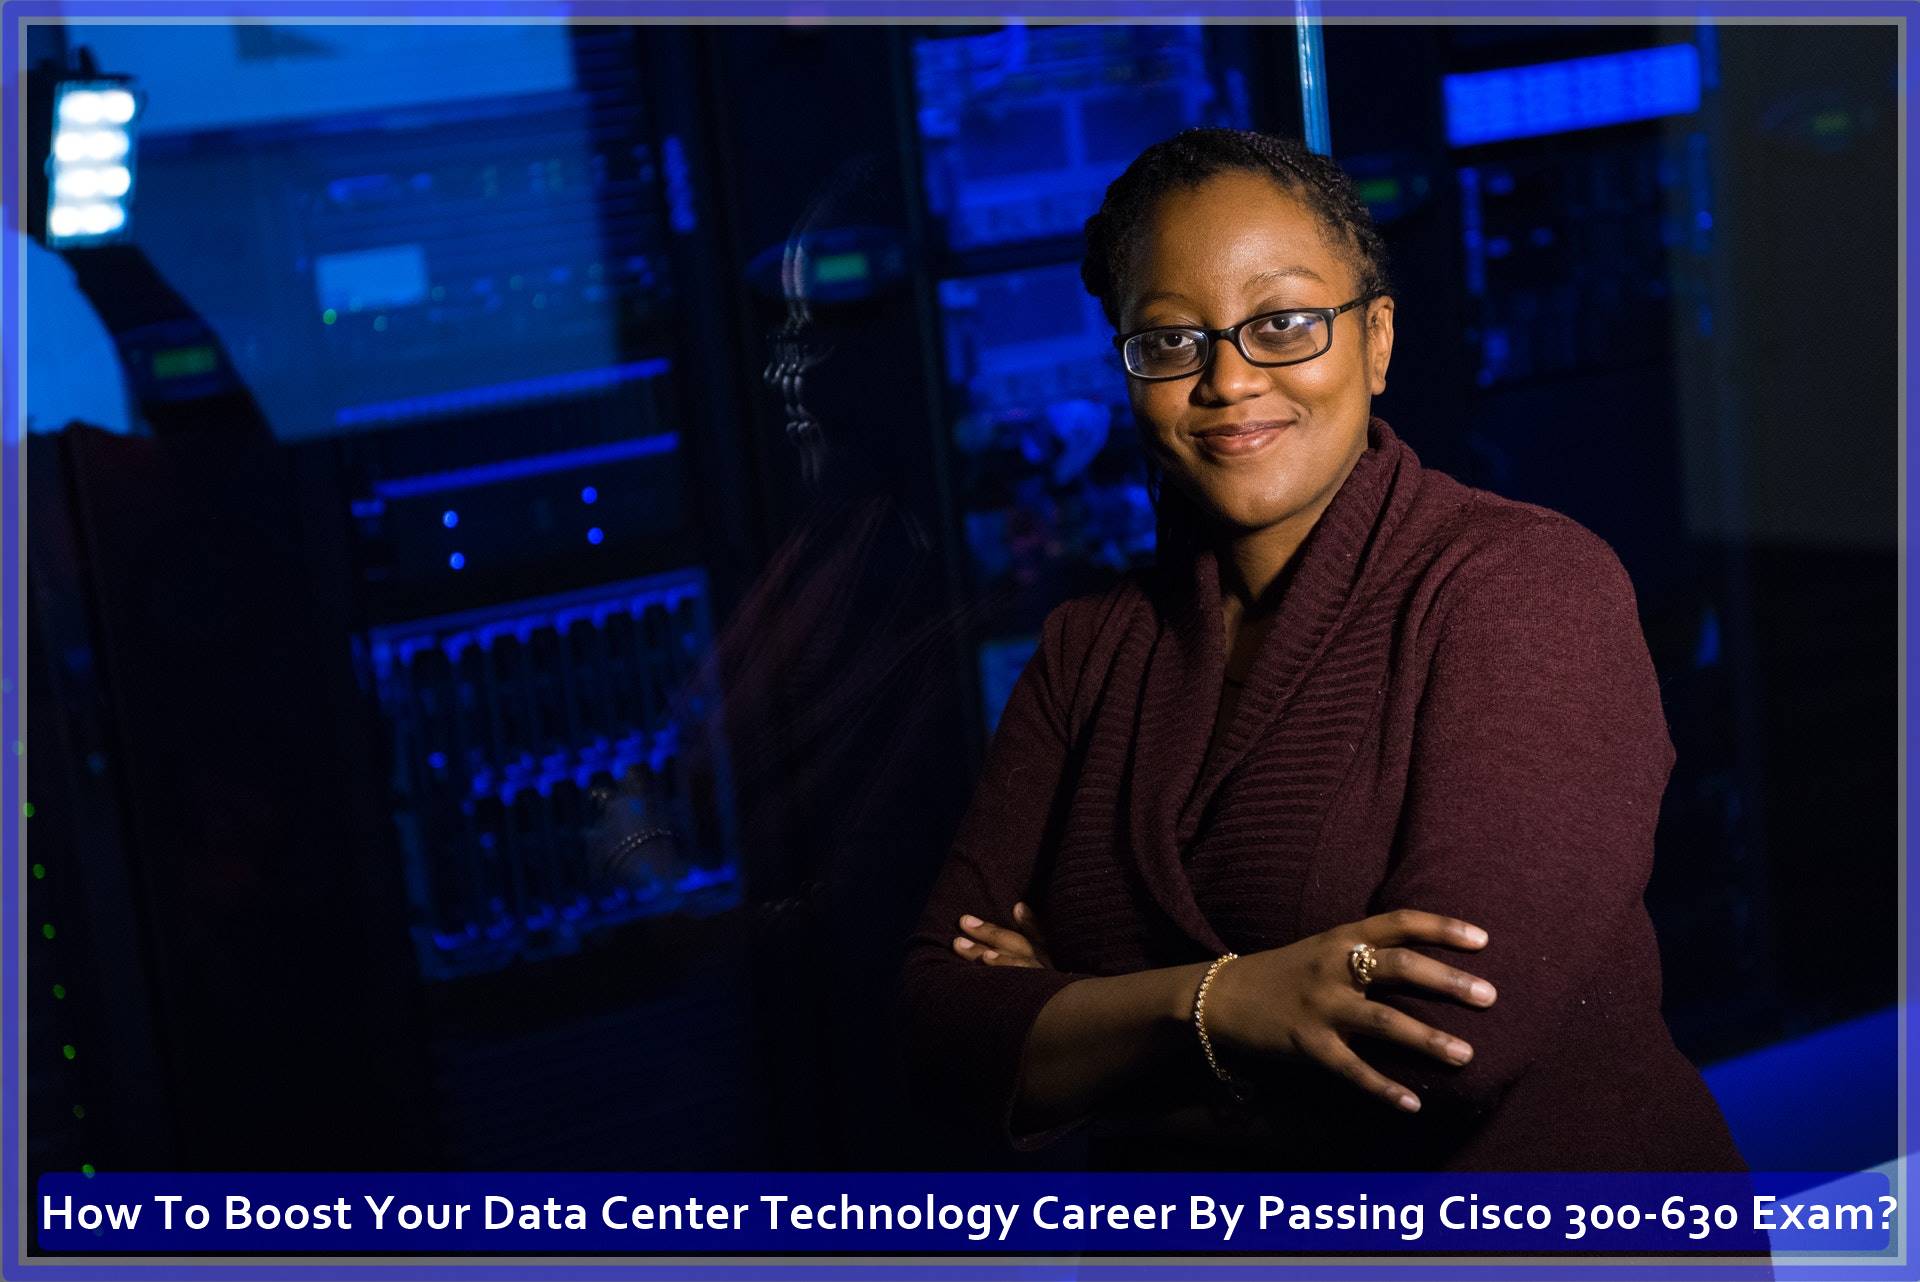 How To Boost Your Data Center Technology Career By Passing Cisco 300-630 Exam?